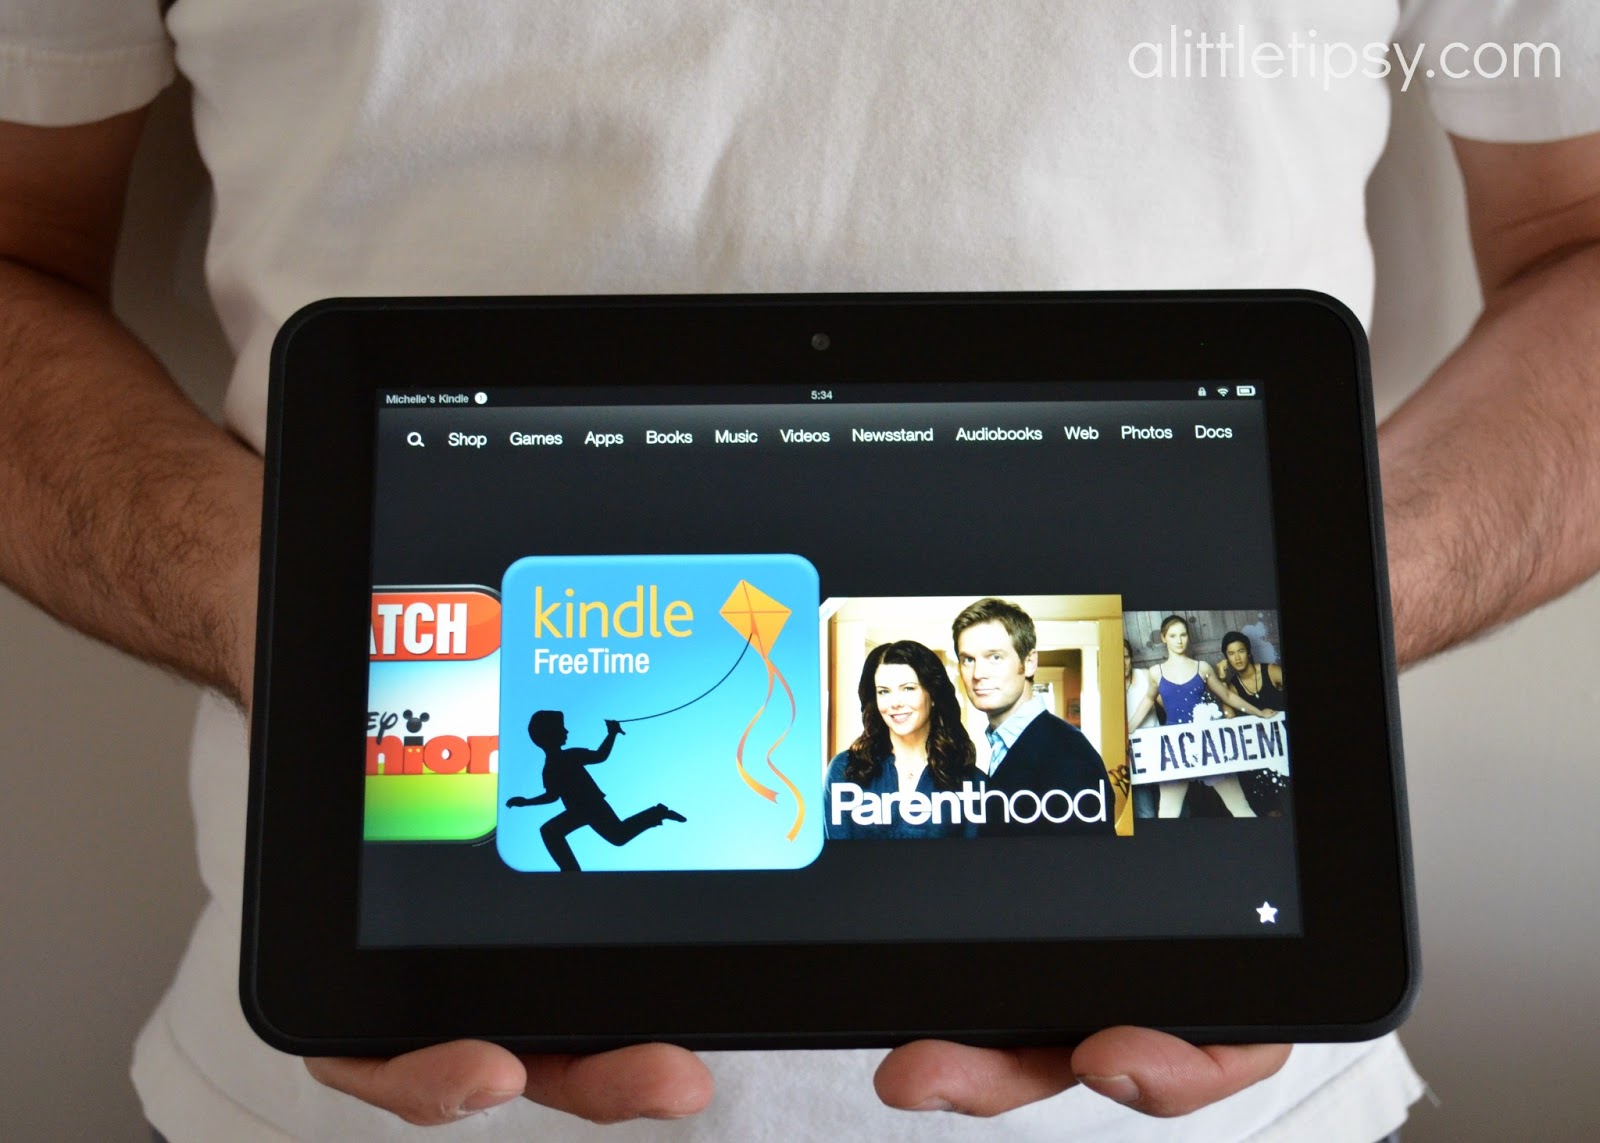 ... shopping around, and here comes the shocker, the Kindle Fire HD